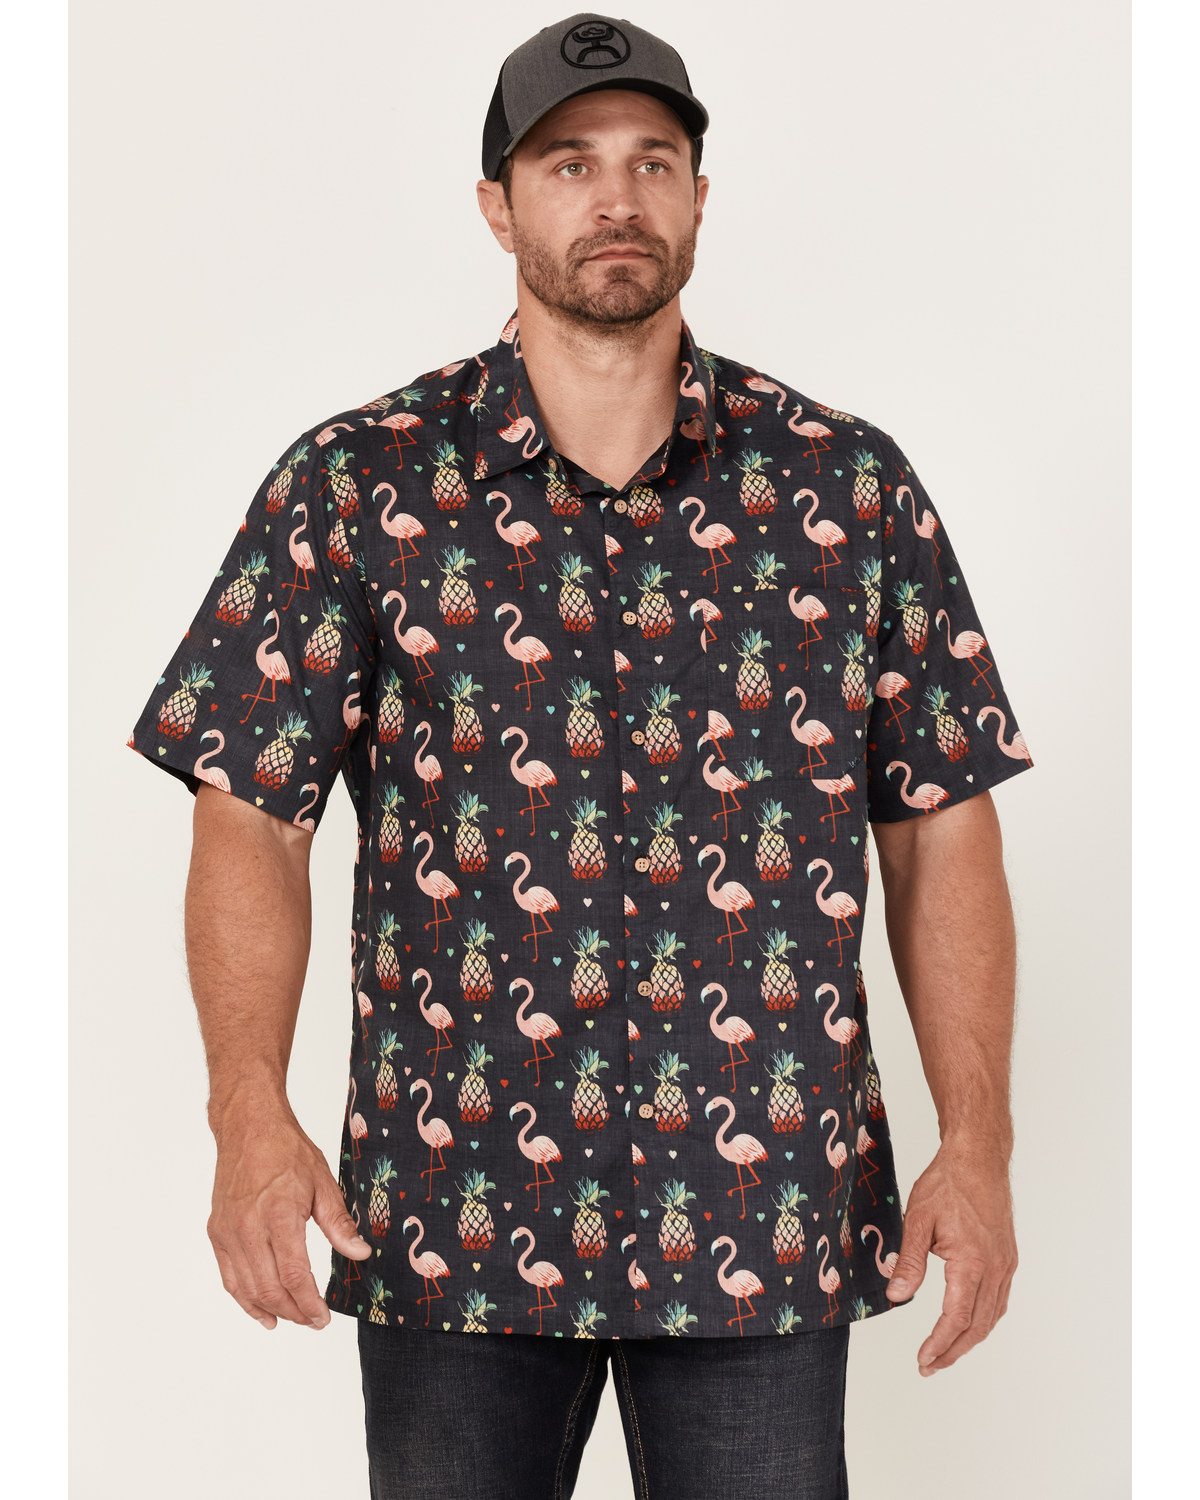 Scully Men's Pineapples & Flamingos Allover Print Short Sleeve Button Down Western Shirt